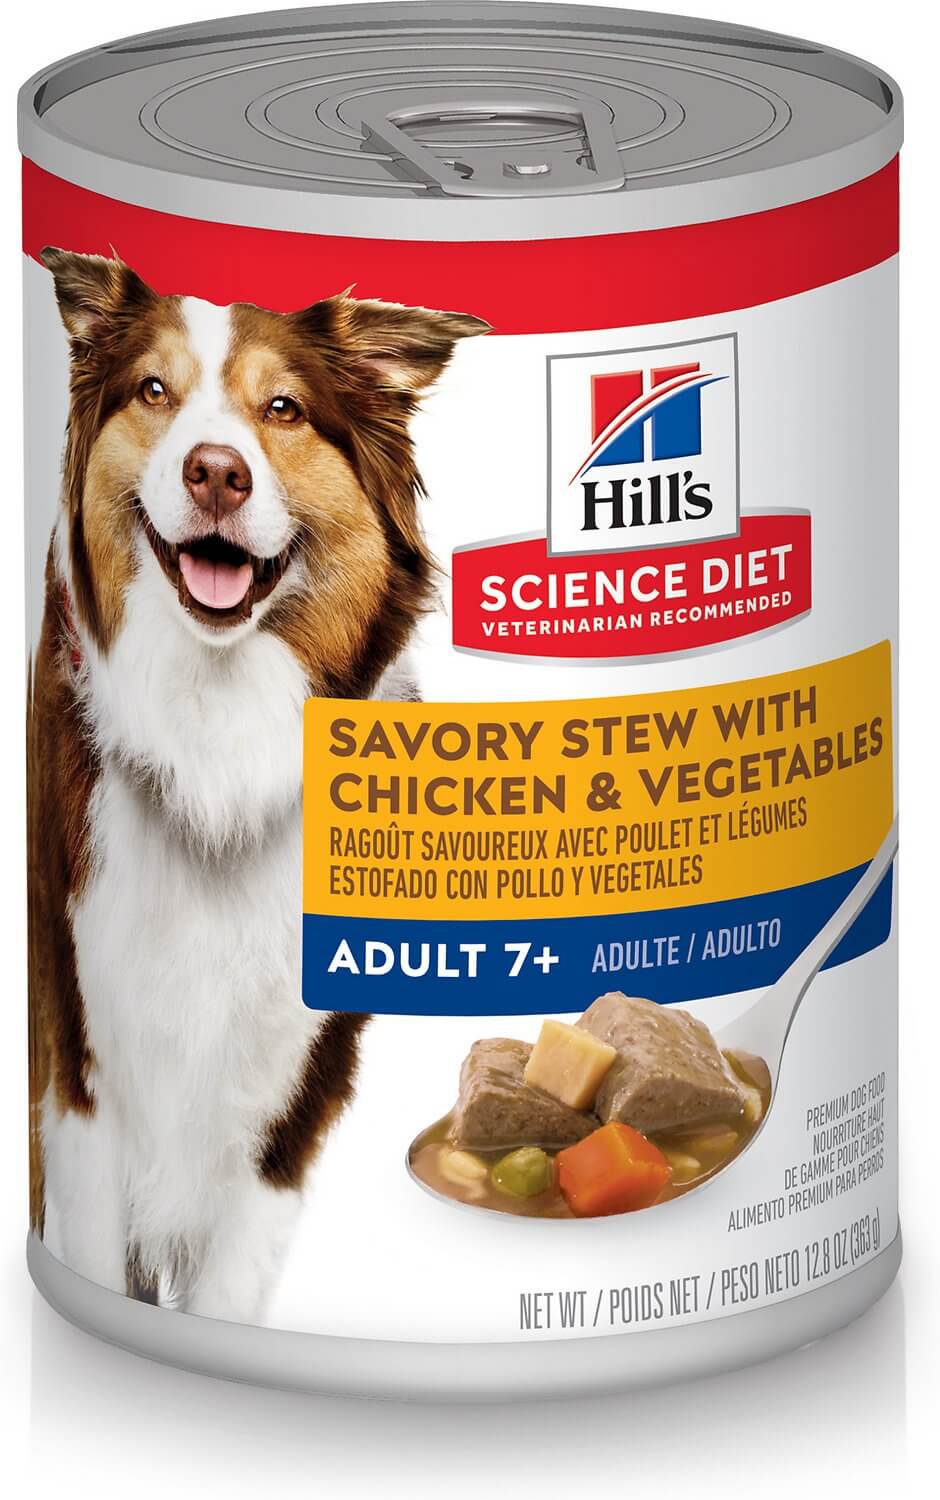 Hill’s Science Diet Adult Plus Dog Food Review (Canned)